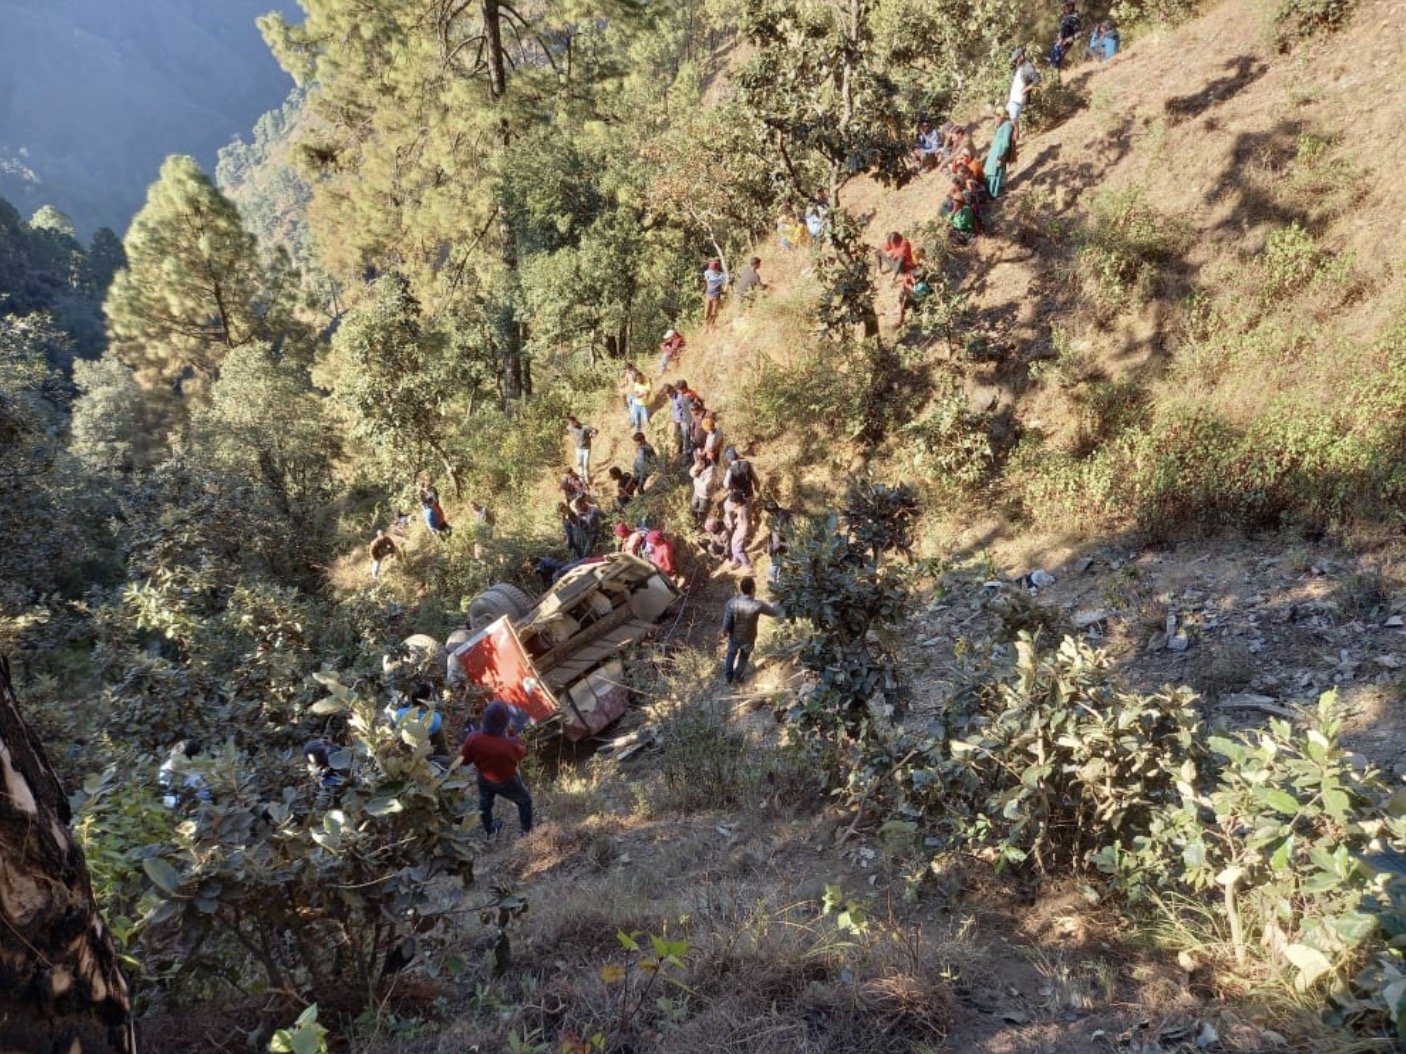 A serious traffic accident in the far west of Nepal killed 9 people